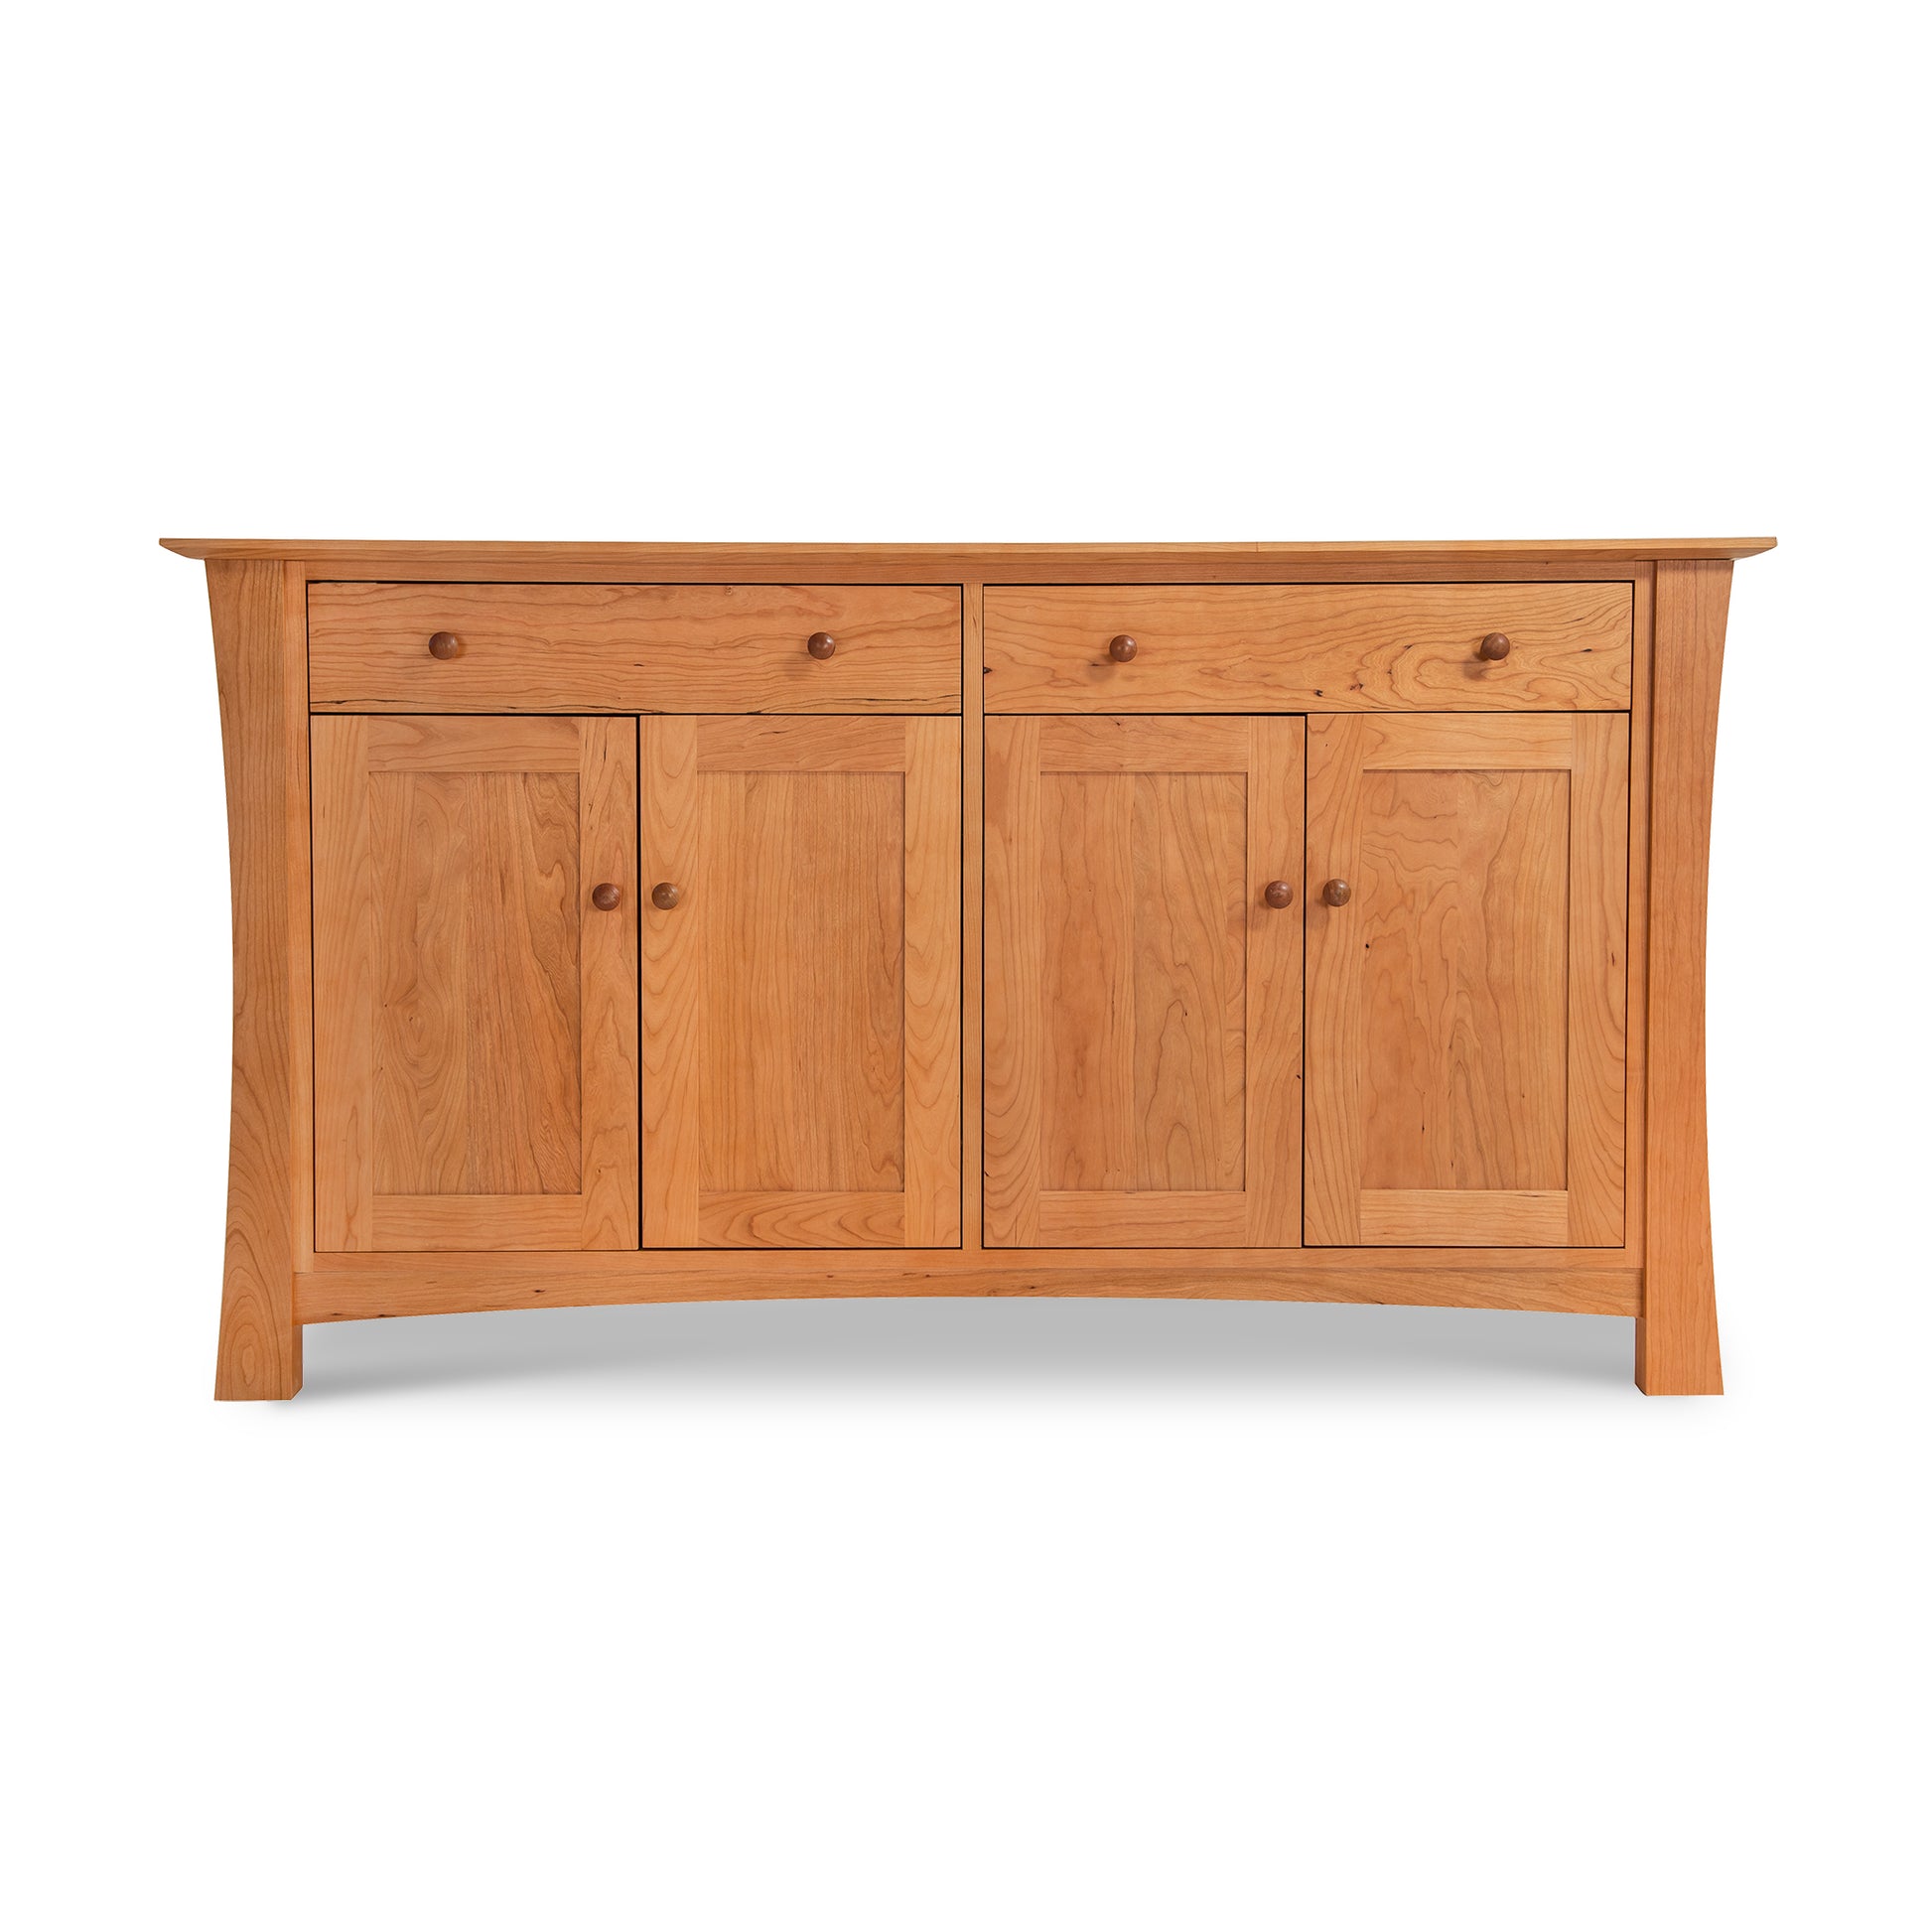 The Lyndon Furniture Andrews Buffet is a contemporary wooden sideboard that offers a modern feel with its two doors and two drawers.